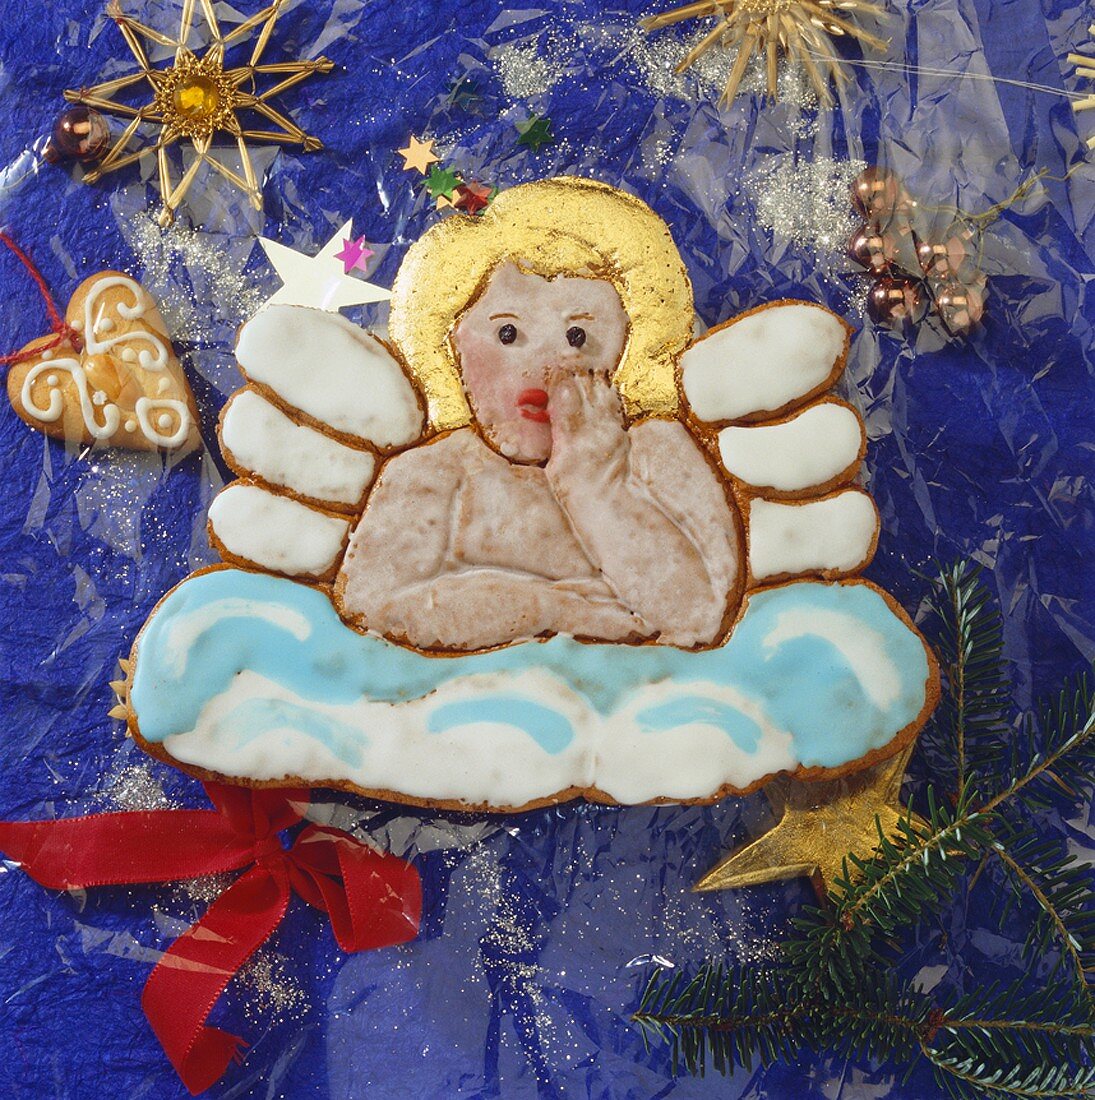 Gingerbread Christmas angel with icing